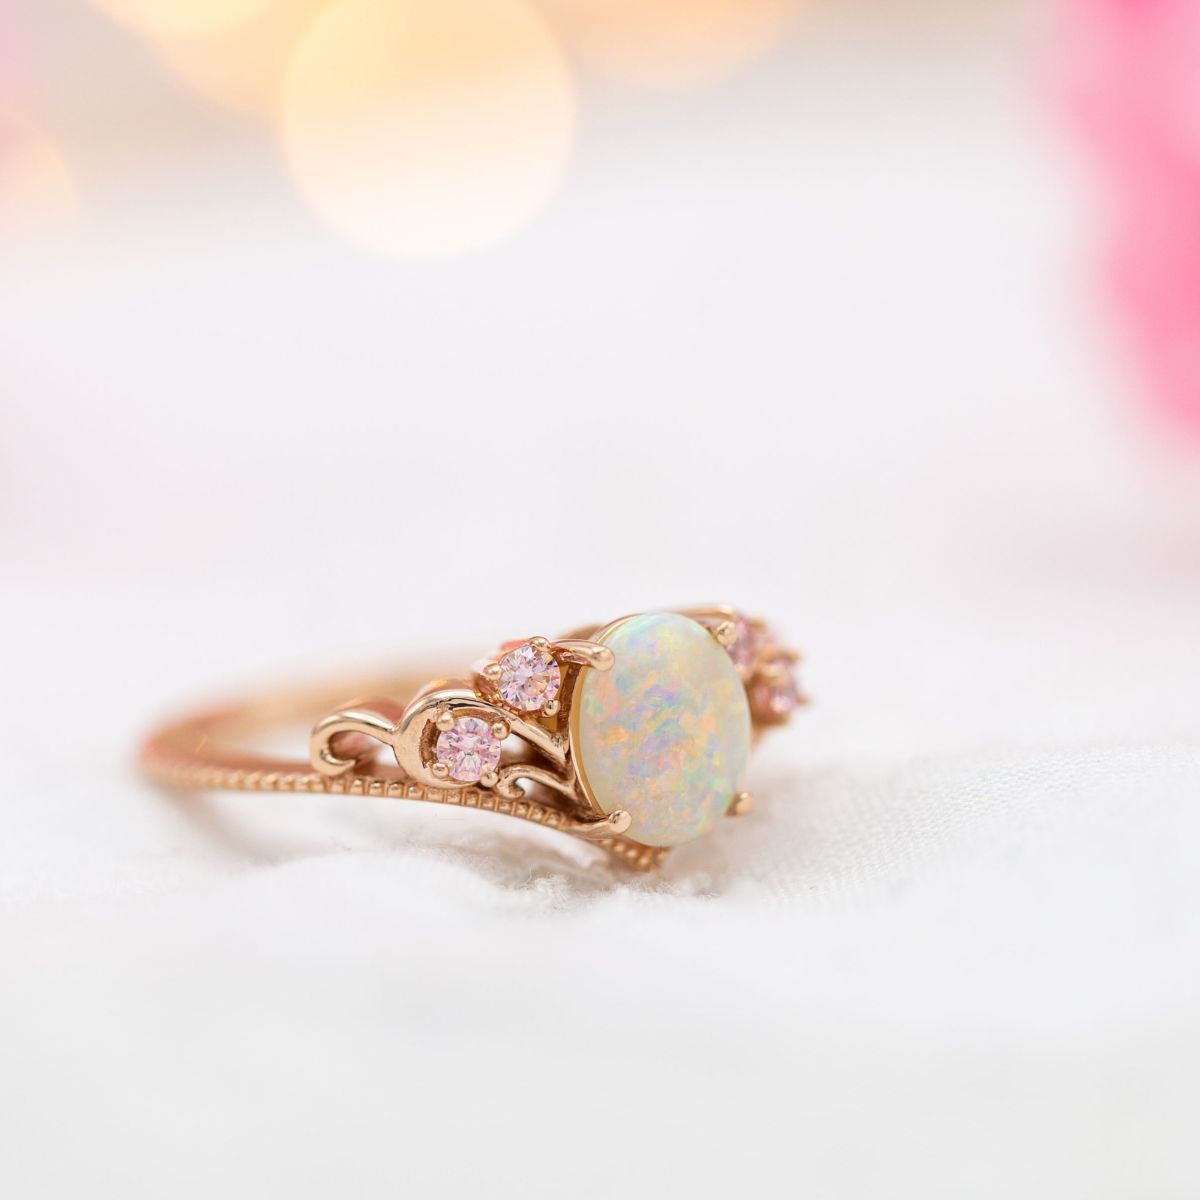 Is Opal A Good Choice For An Engagement Ring? | Custommade.Com